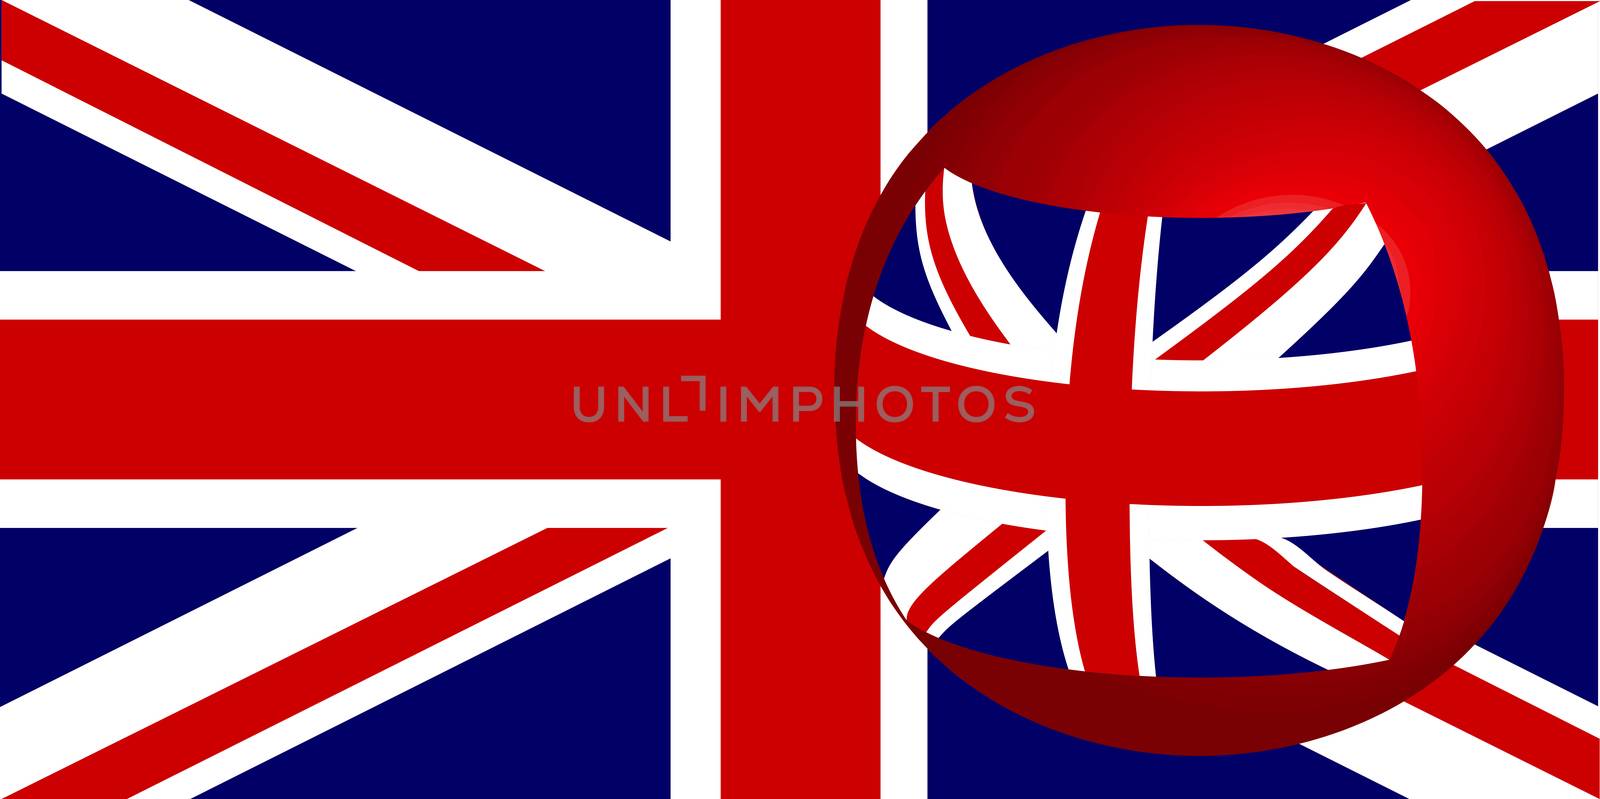 The British Union Flag, or Union Jack when used on board ship, as a background and reflected into a sphere.